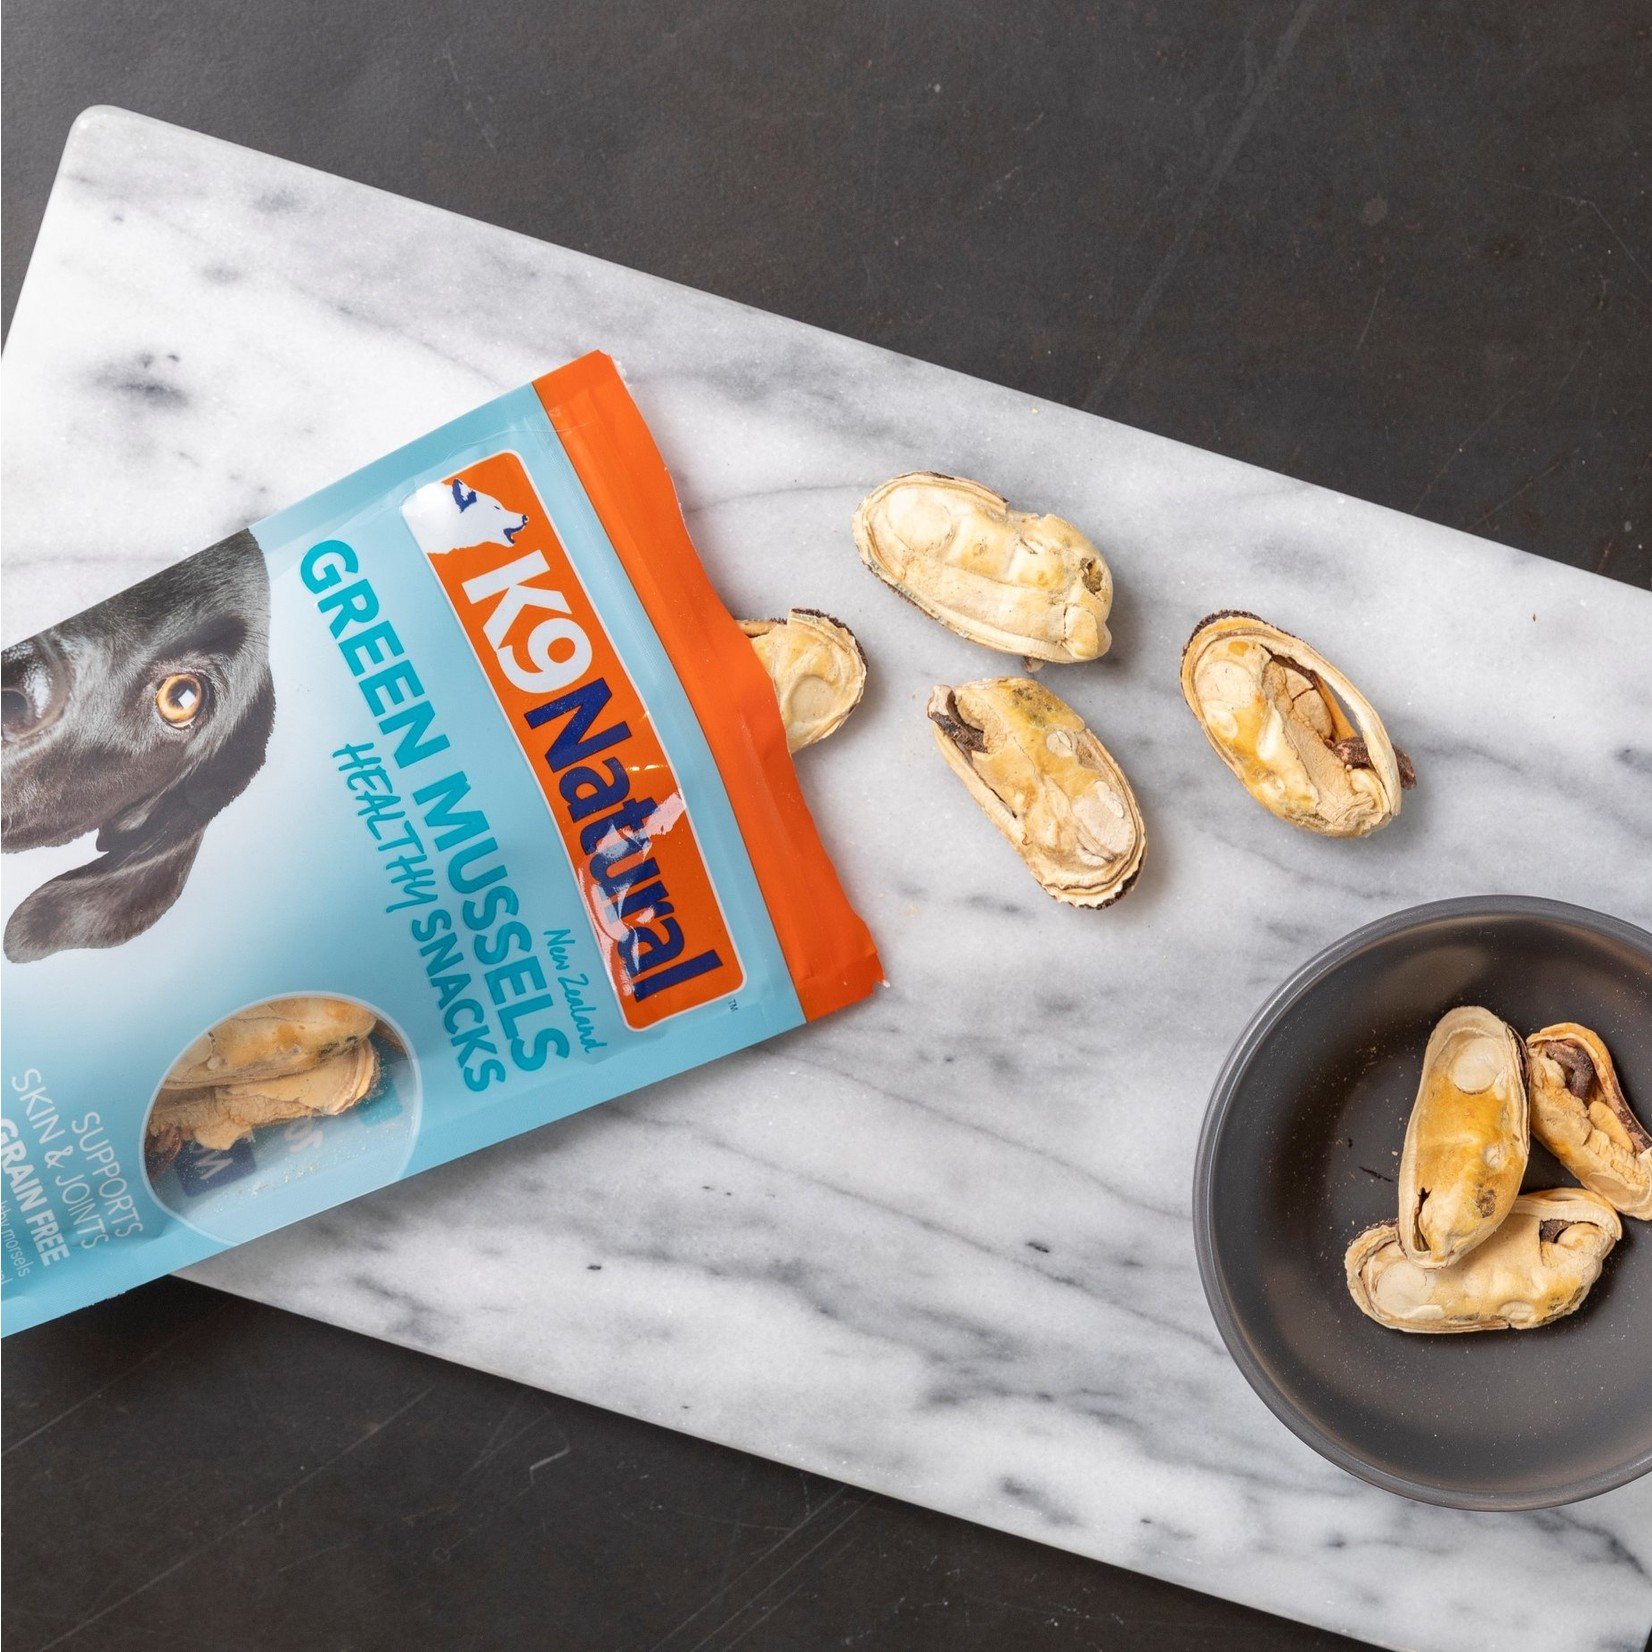 K9 Natural K9 Natural - Green Mussels Healthy Snack